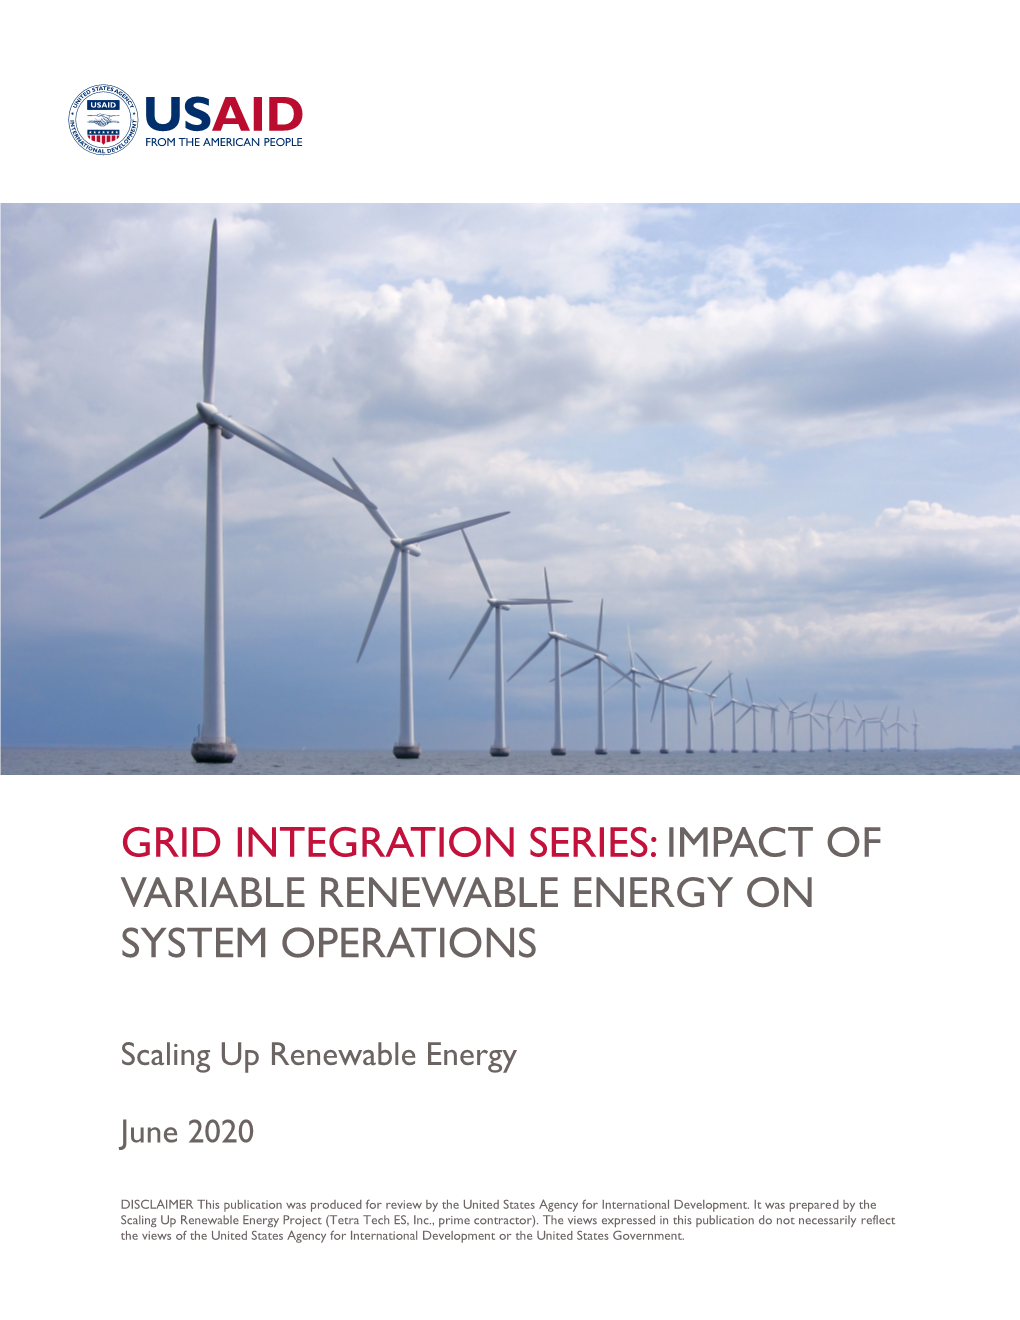 Impact of Variable Renewable Energy on System Operations